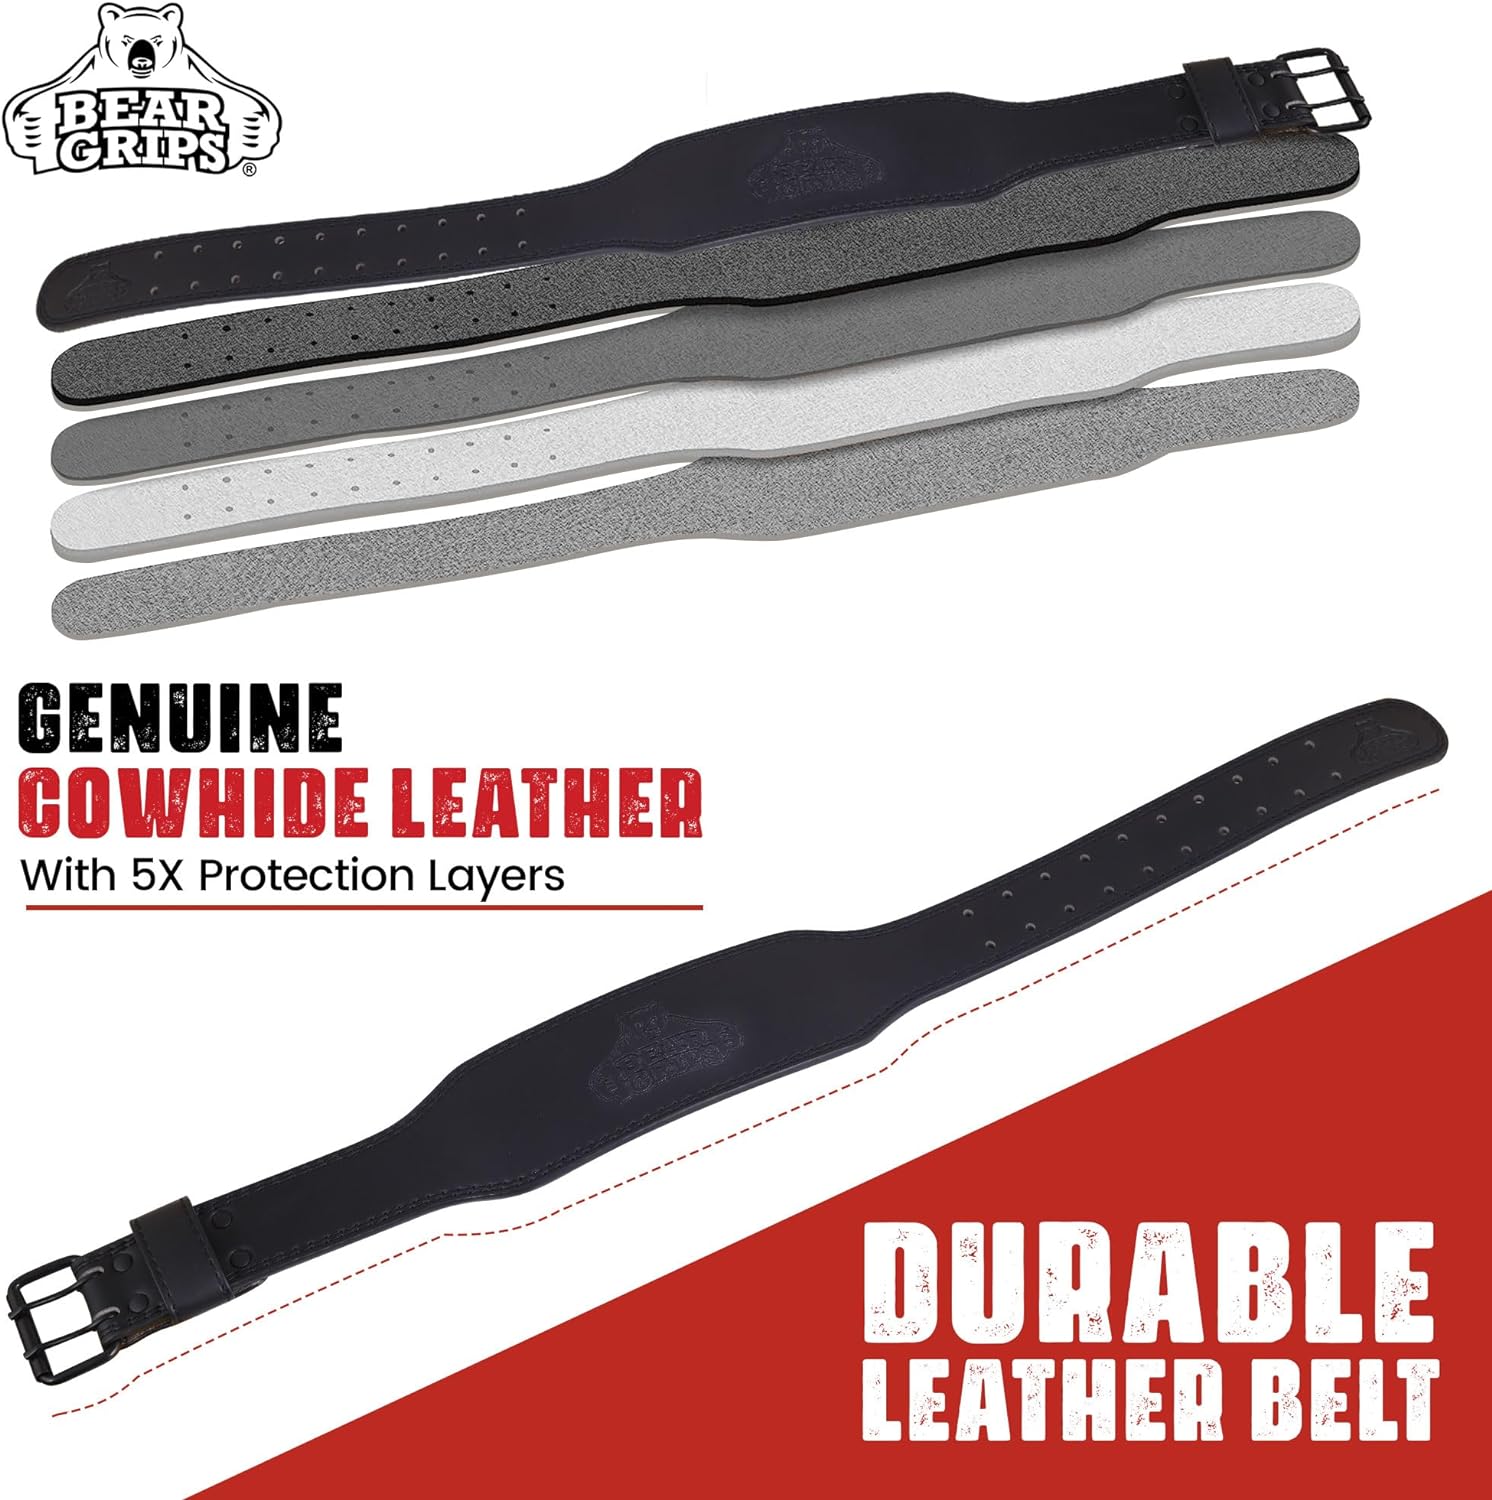 7mm Leather Belt - Padded Back Support - Contour Shape - Double Prong